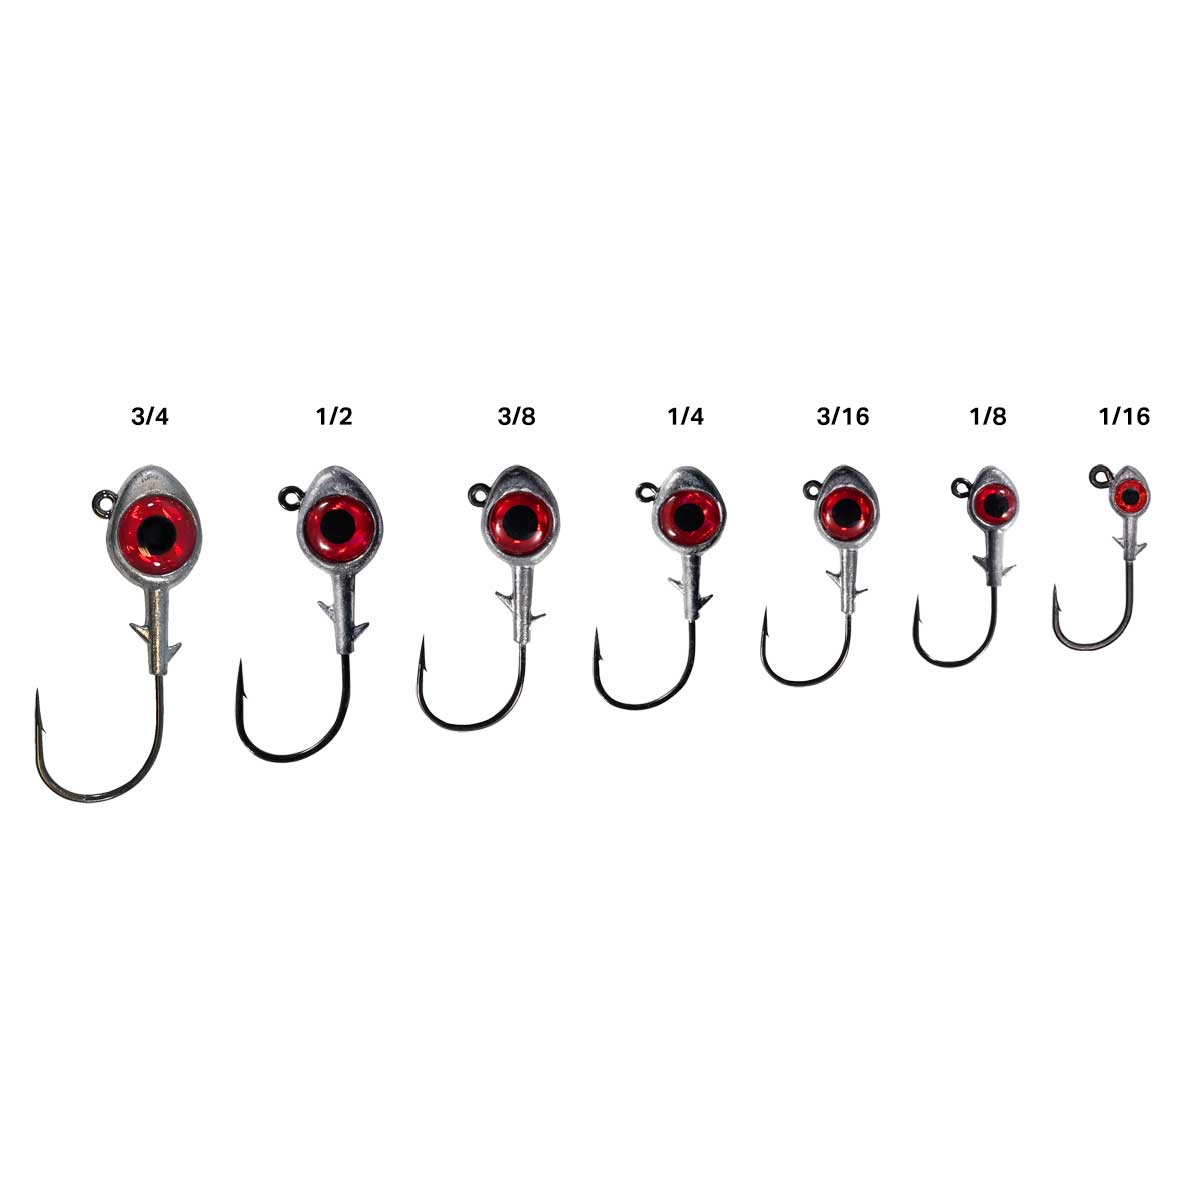 charlie's worms Red Eyed Jig size chart